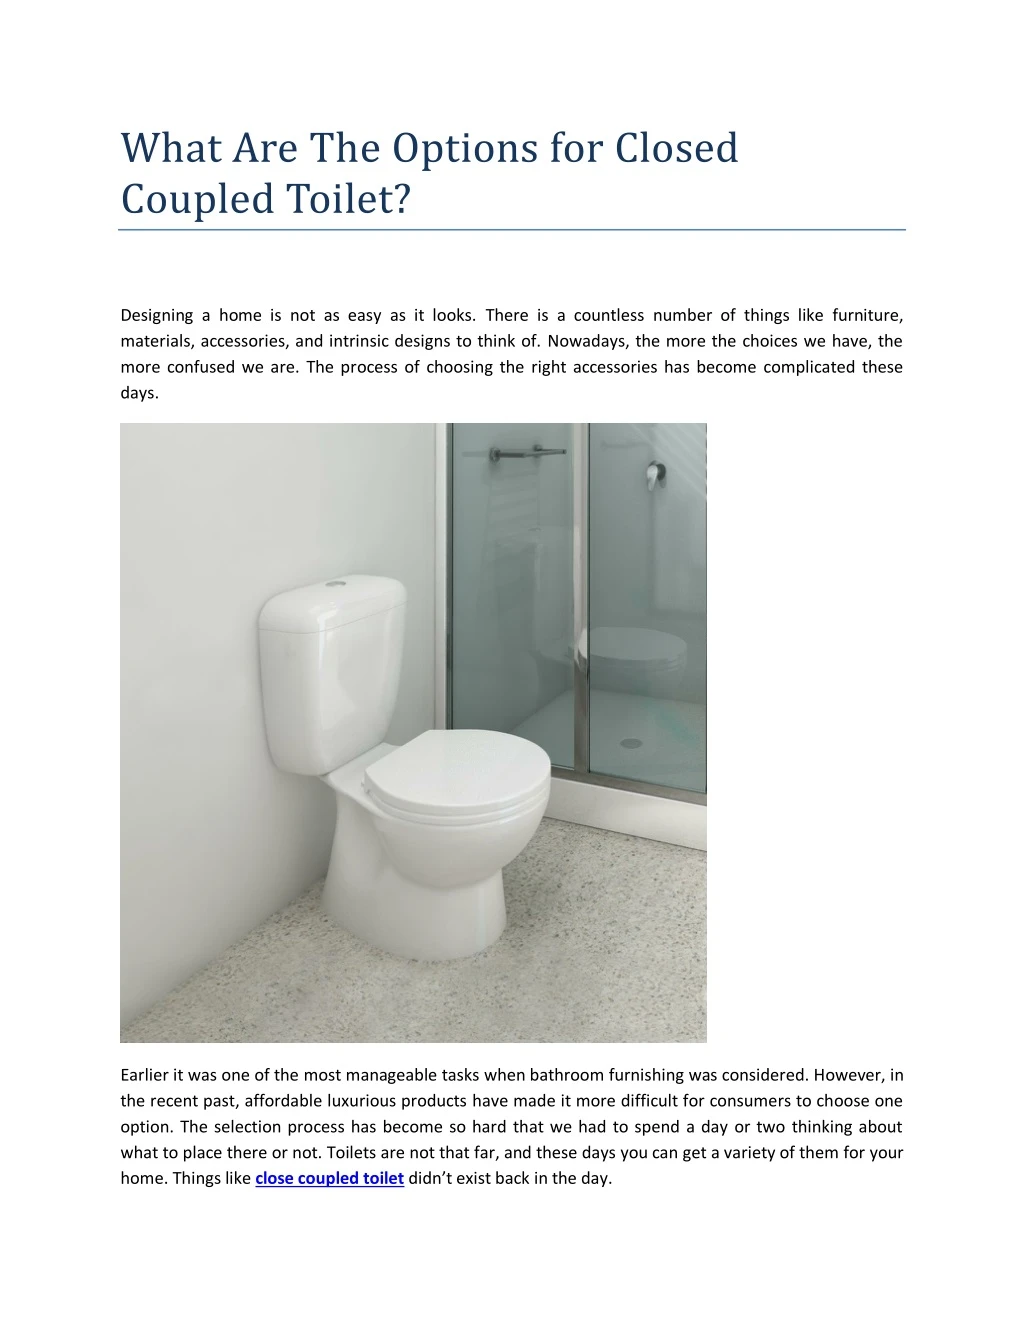 what are the options for closed coupled toilet